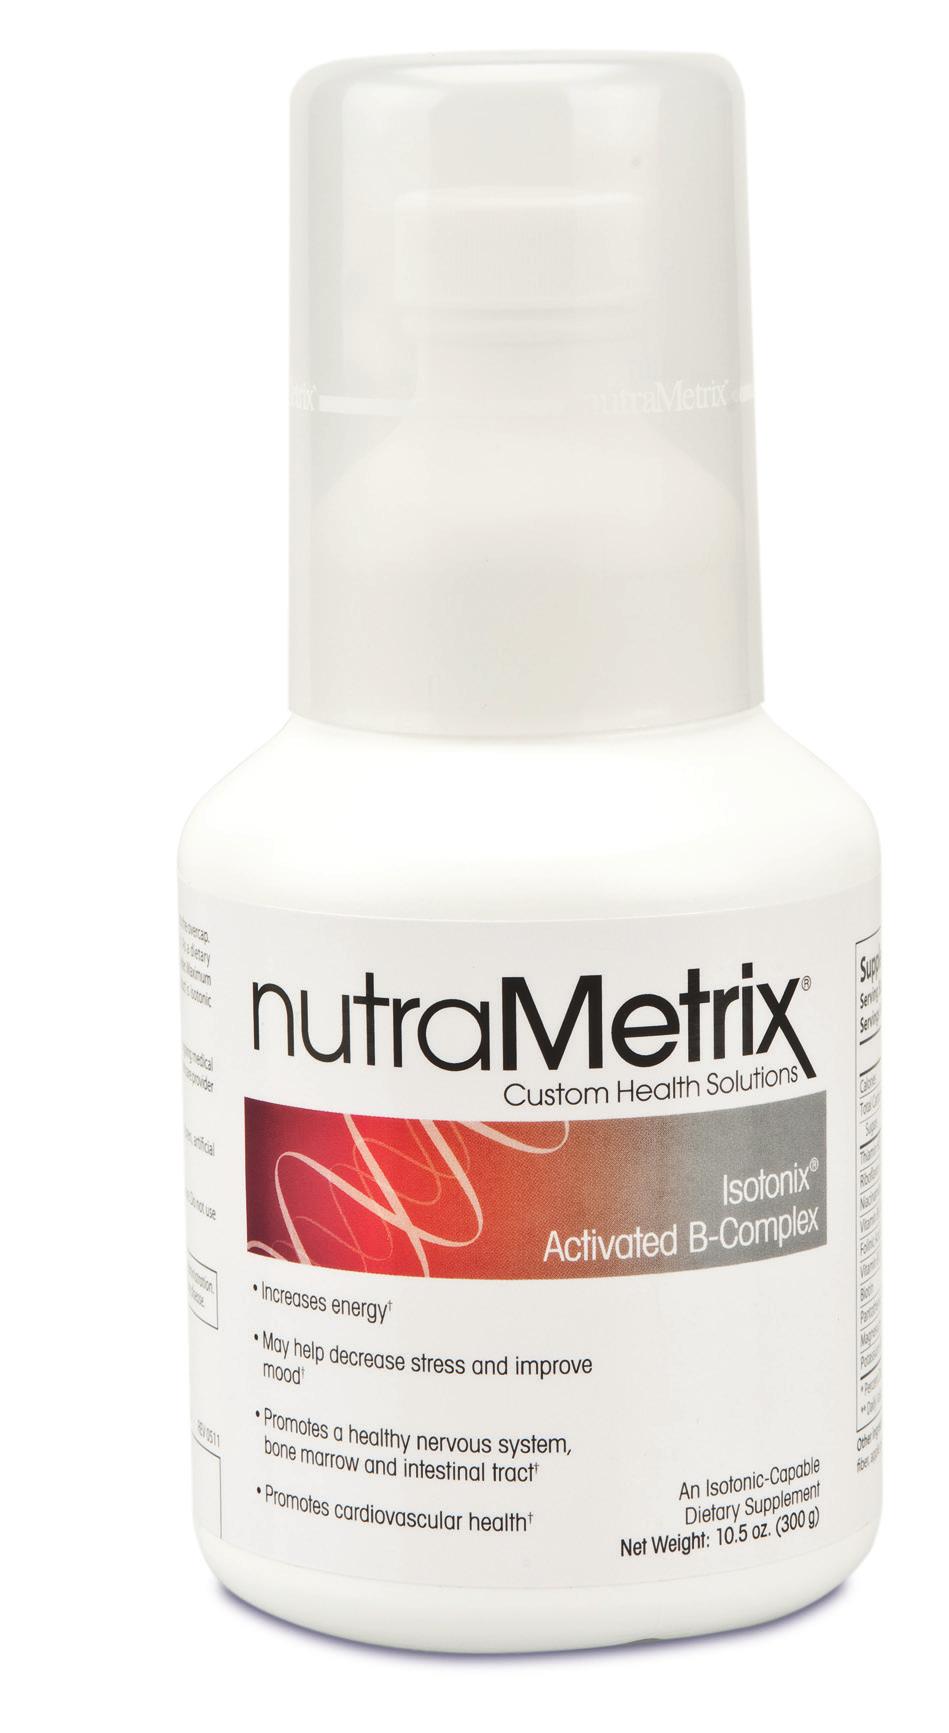 nutrametrix Isotonix Advanced B-Complex Increases energy Promotes a healthy nervous system, bone marrow and intestinal tract Promotes cardiovascular health May help decrease stress and improve mood